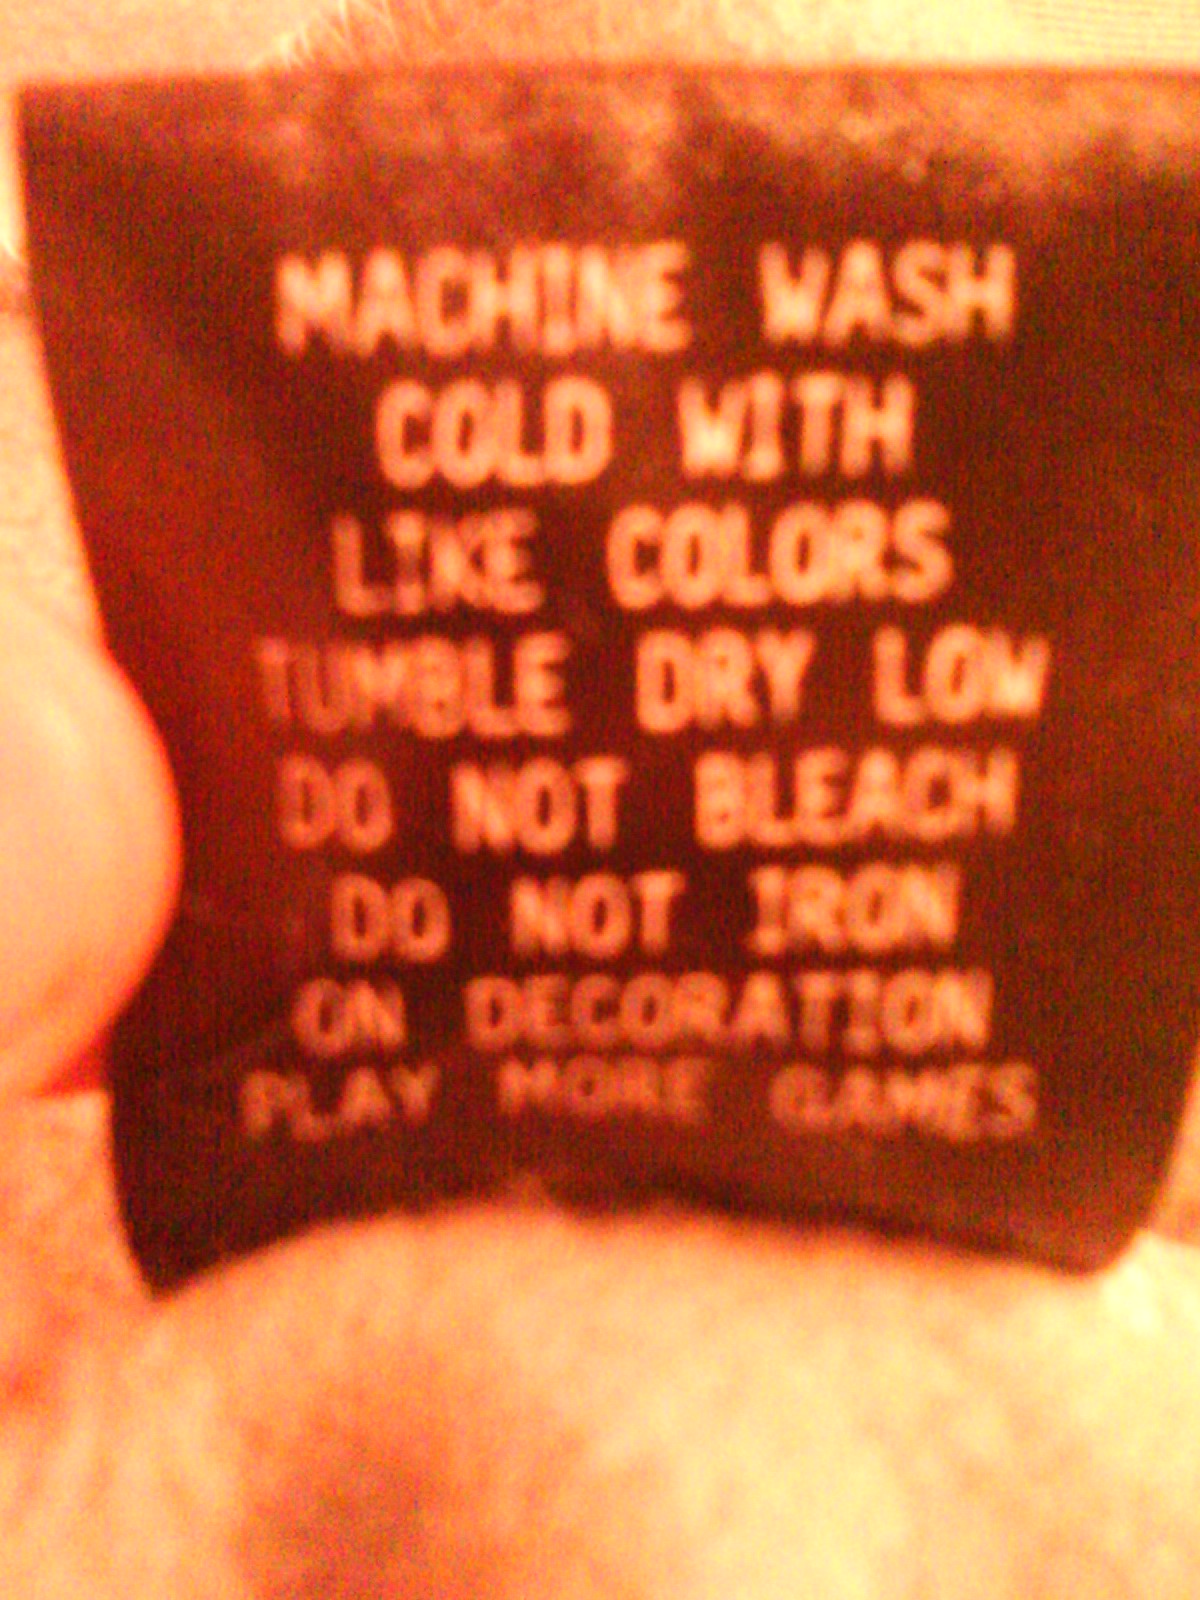 Found this on my portal 2 Hoodie Washing instructions